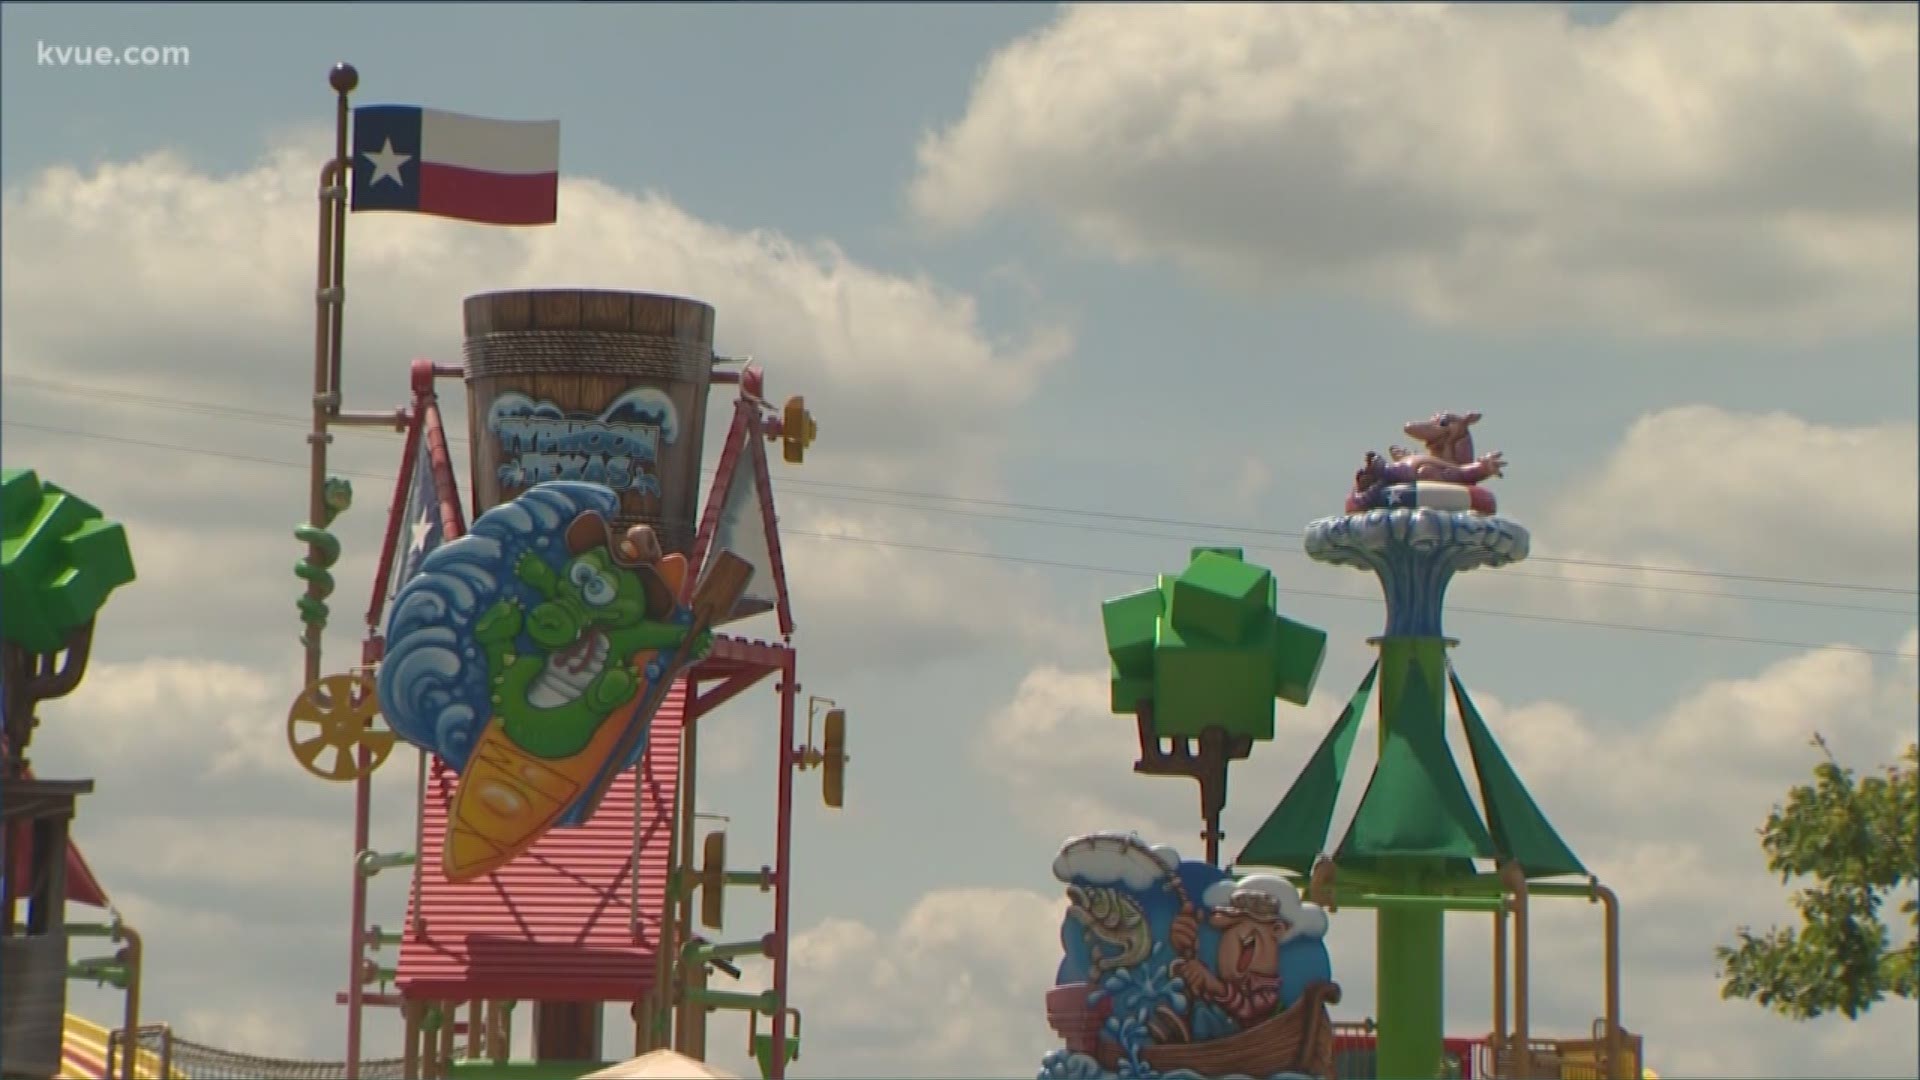 The Pflugerville waterpark is looking to hire around 600 people this summer.